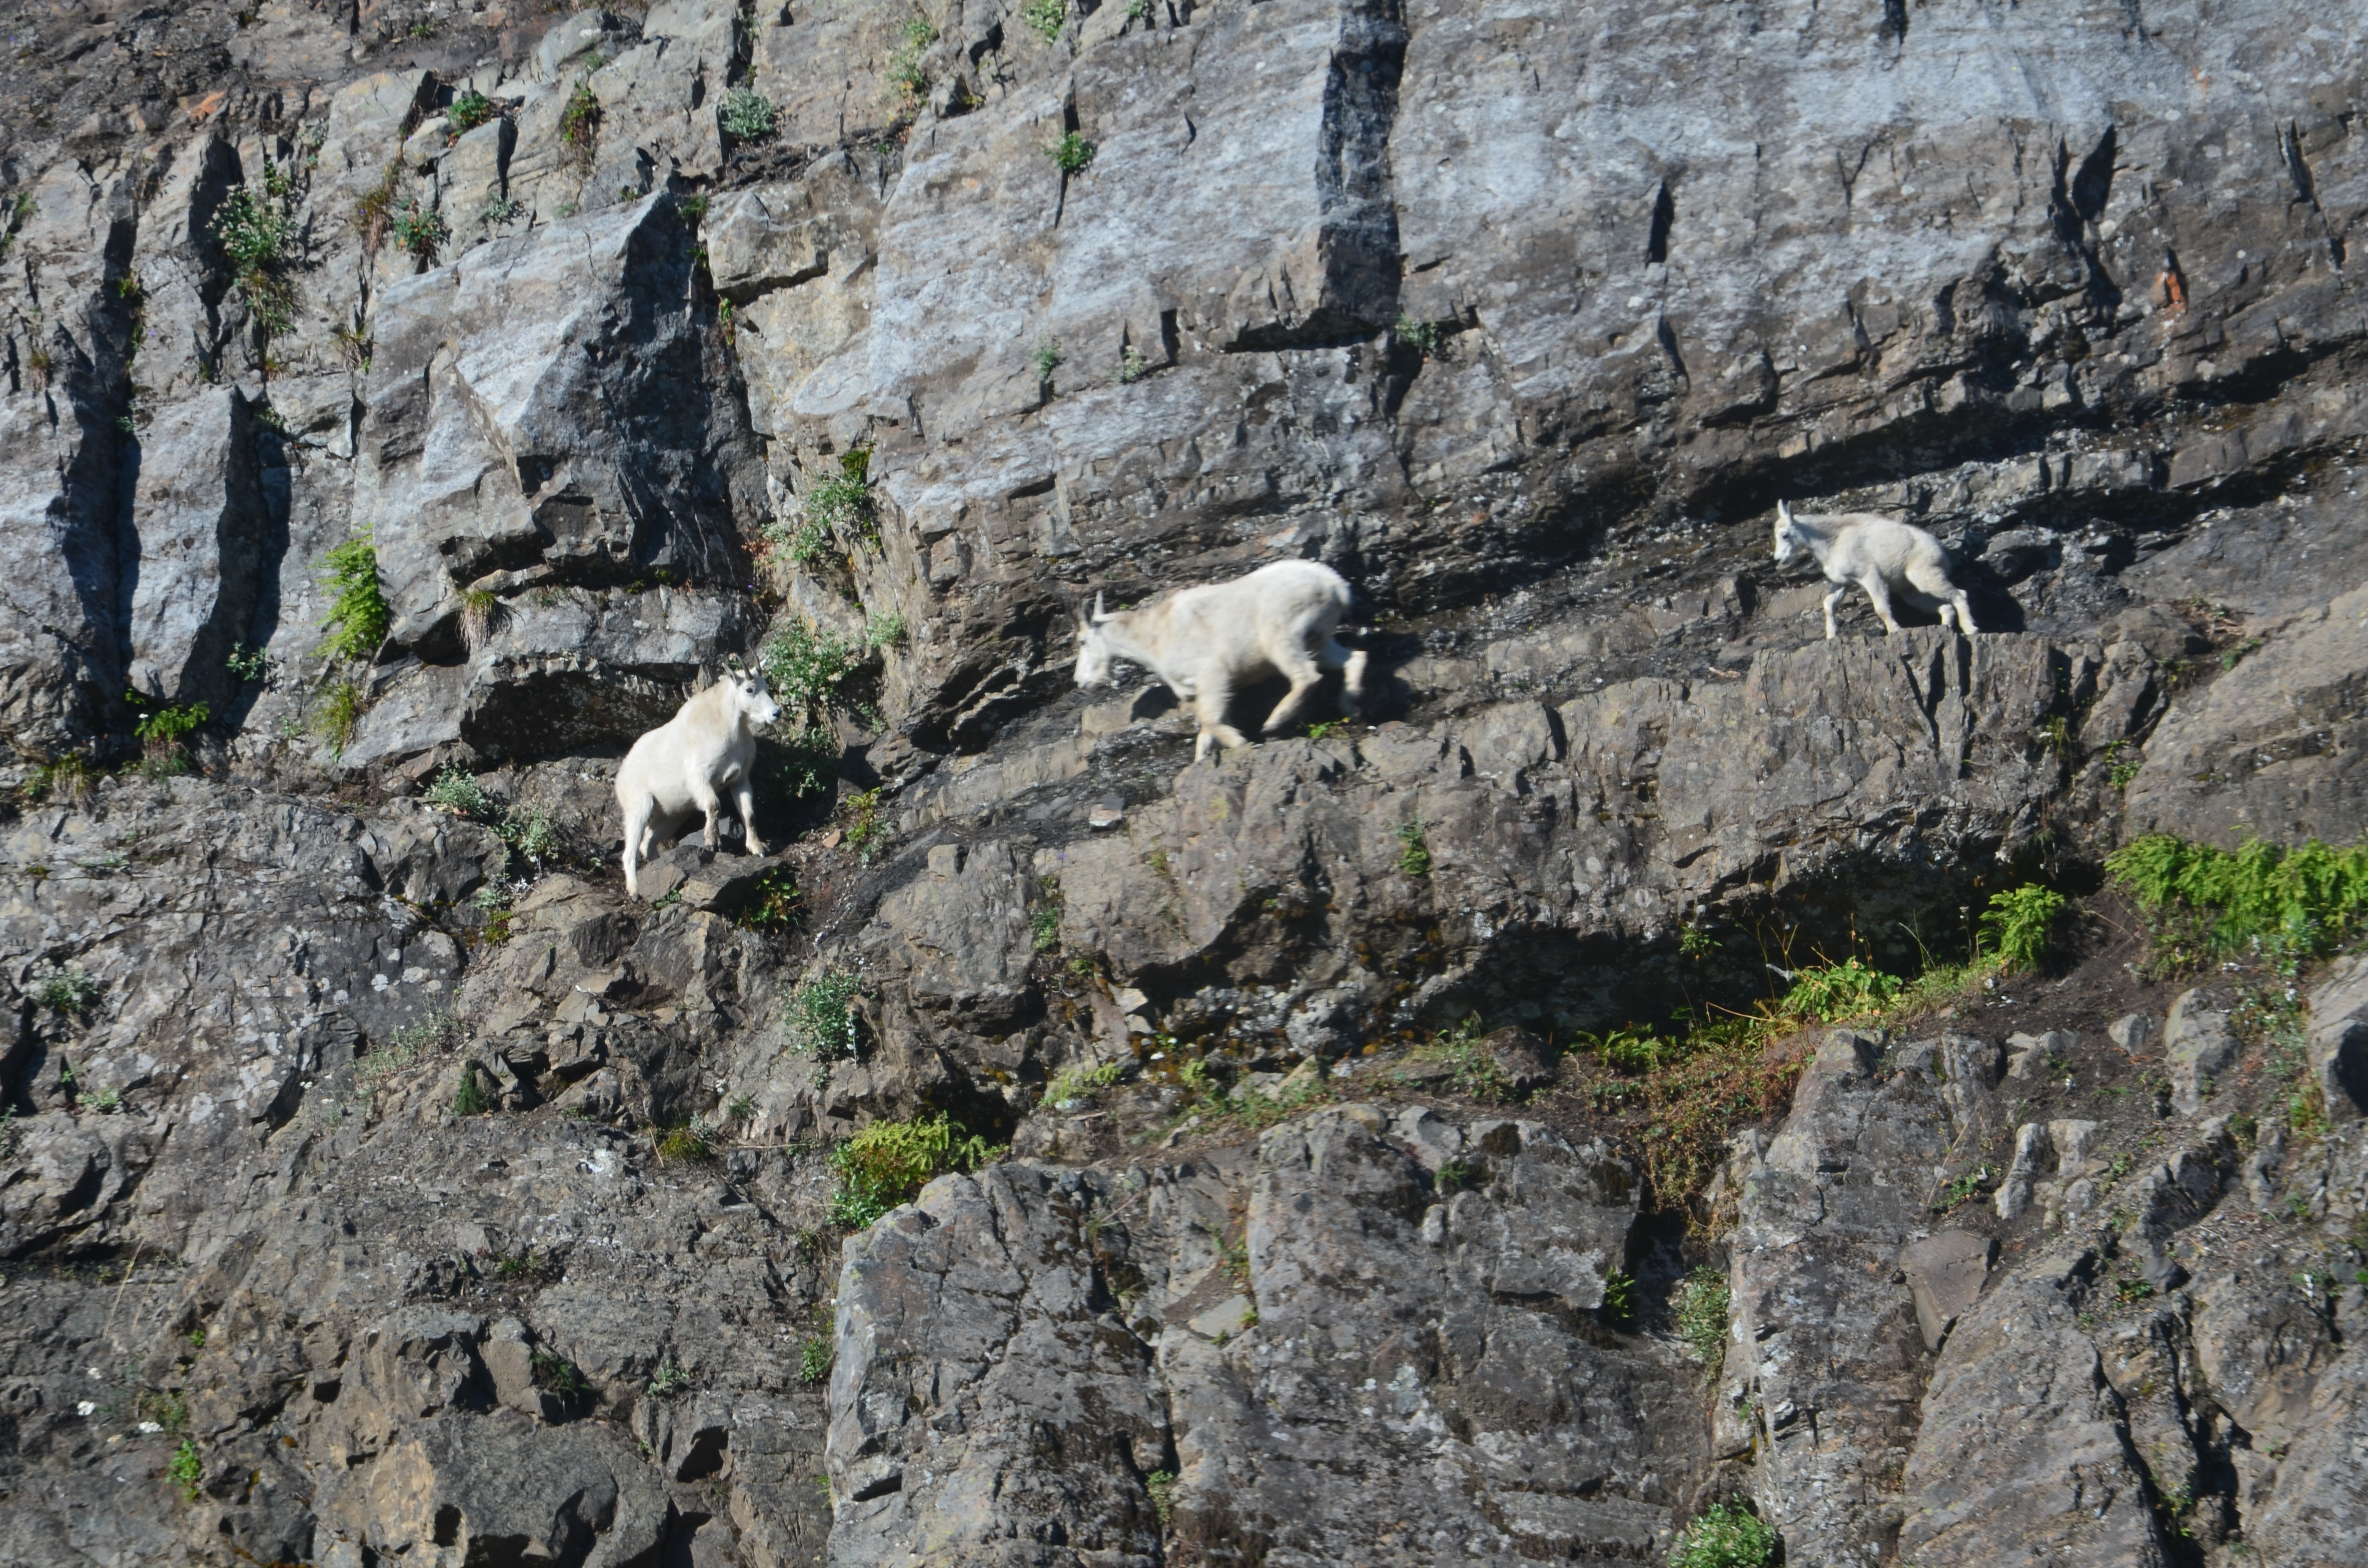 North Cascades mountain goats threatened by climate change